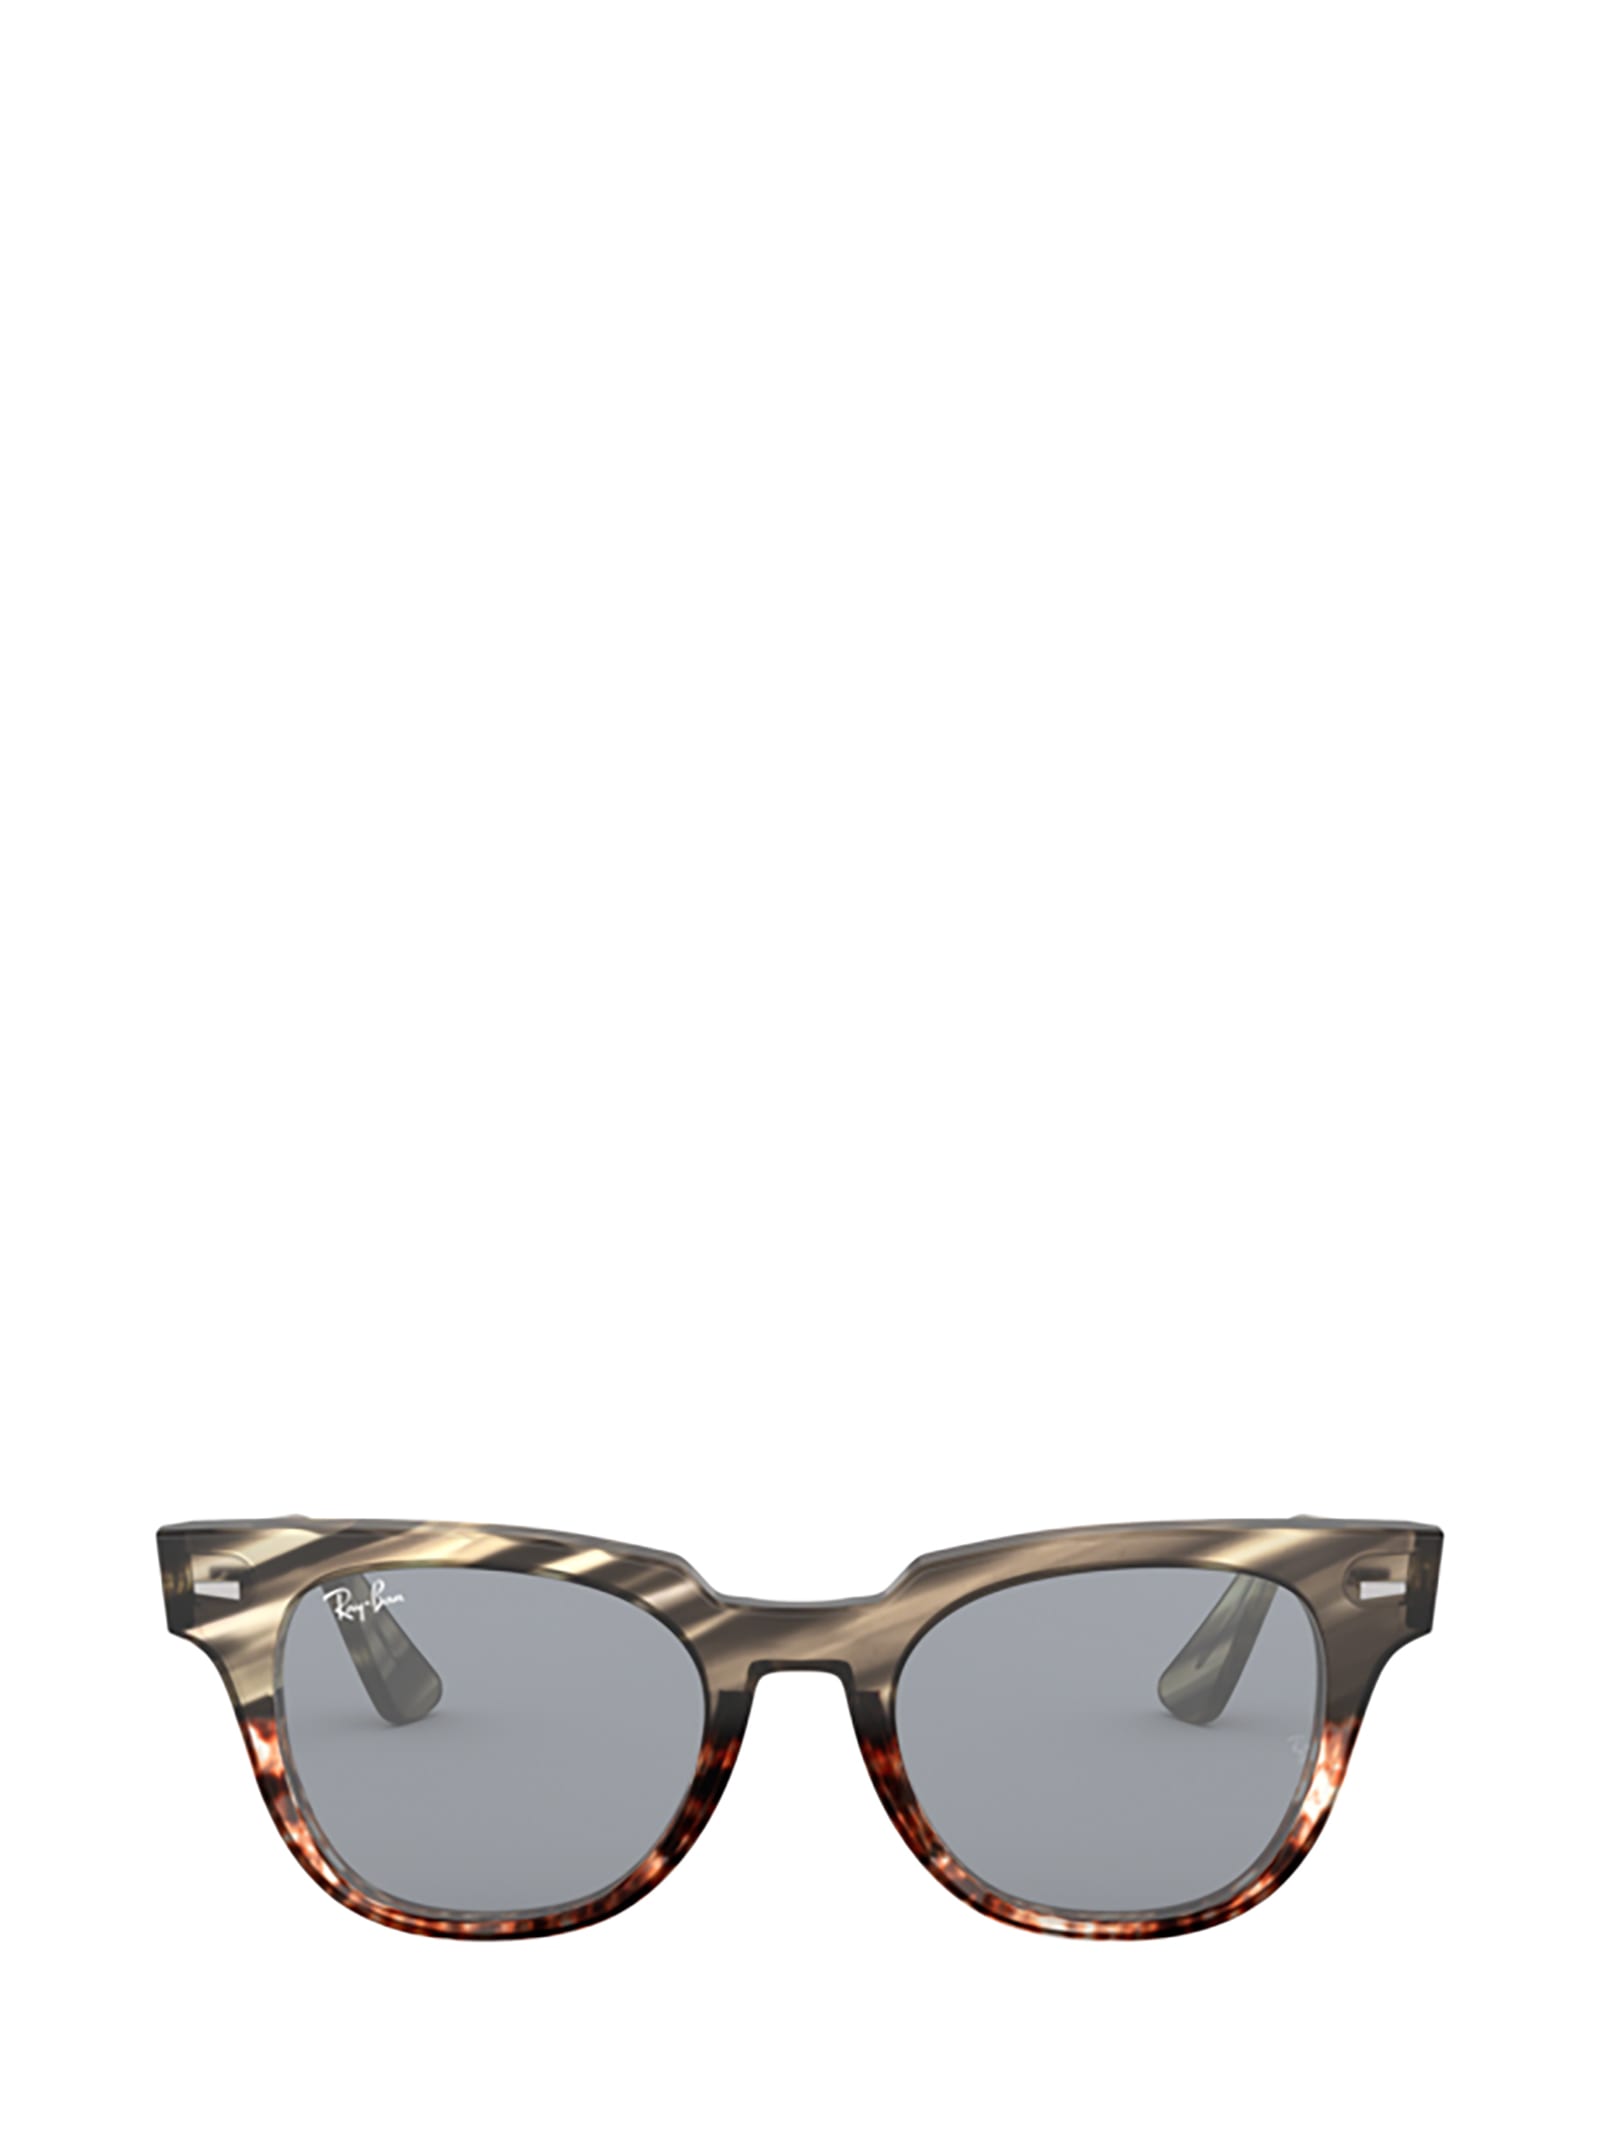 Ray-Ban Ray-ban Rb2168 Grey Gradient Brown Stripped Sunglasses